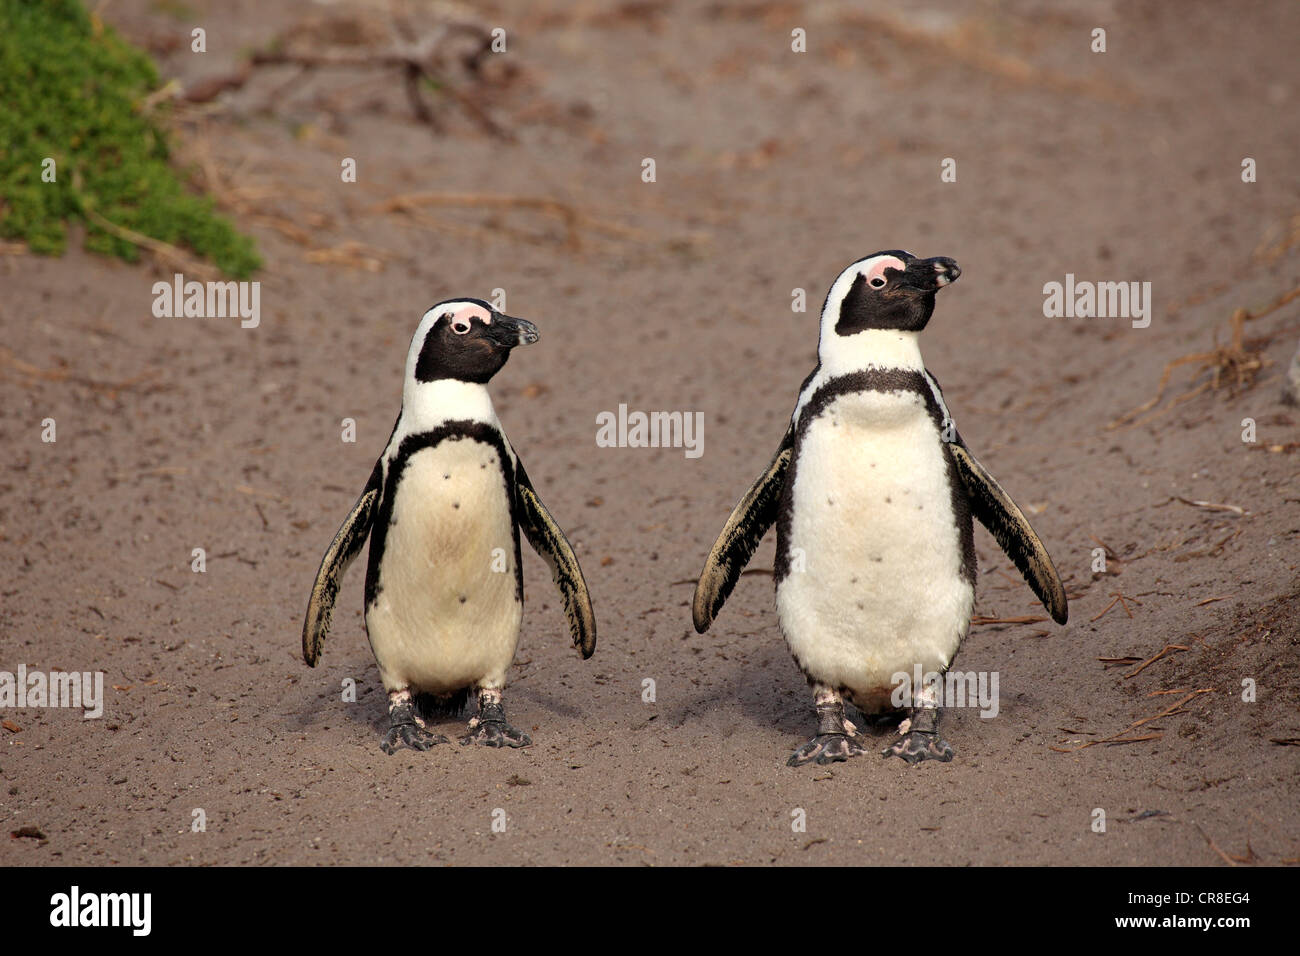 African Penguins, Black-footed Penguin or Jackass Penguin (Spheniscus demersus), pair, walking on the beach, Betty's Bay Stock Photo